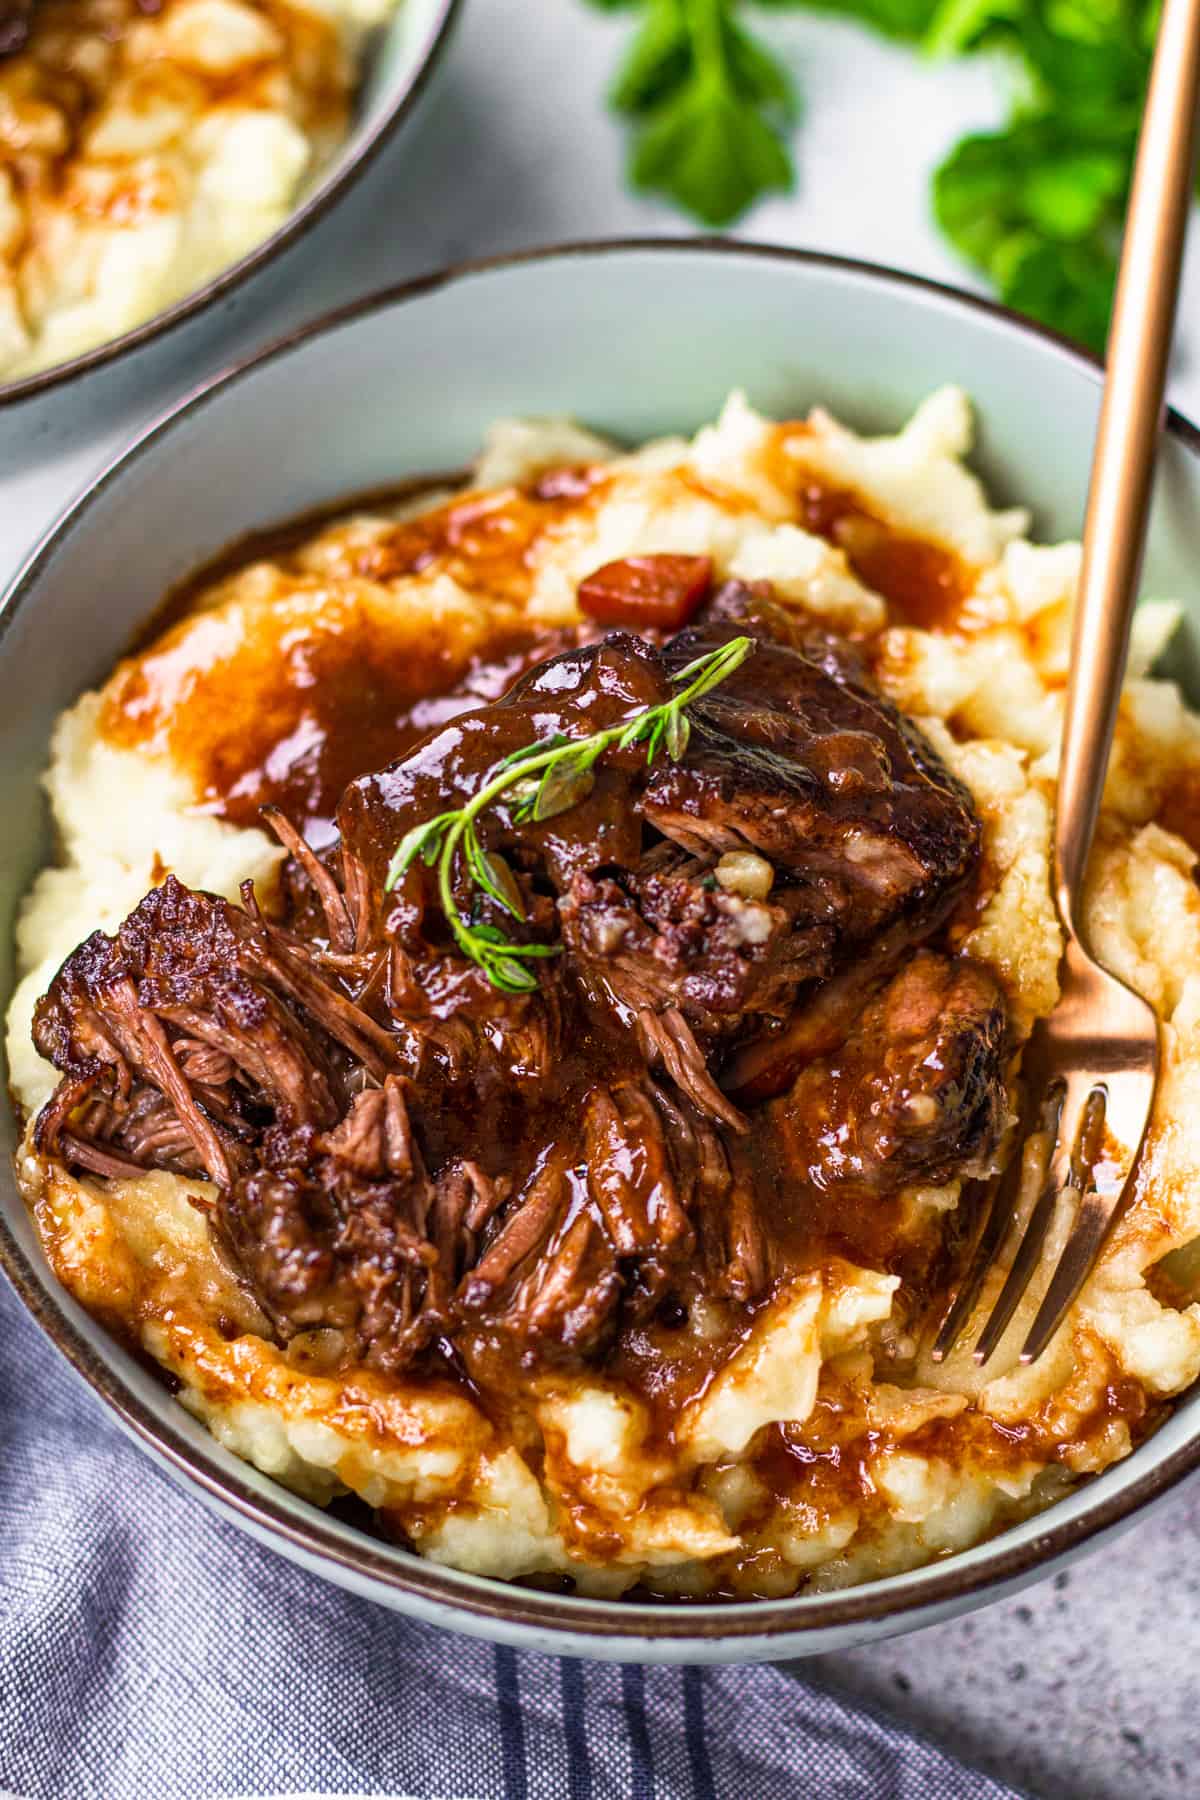 Bone in short rib with mashed potatoes, topped with red wine gravy.